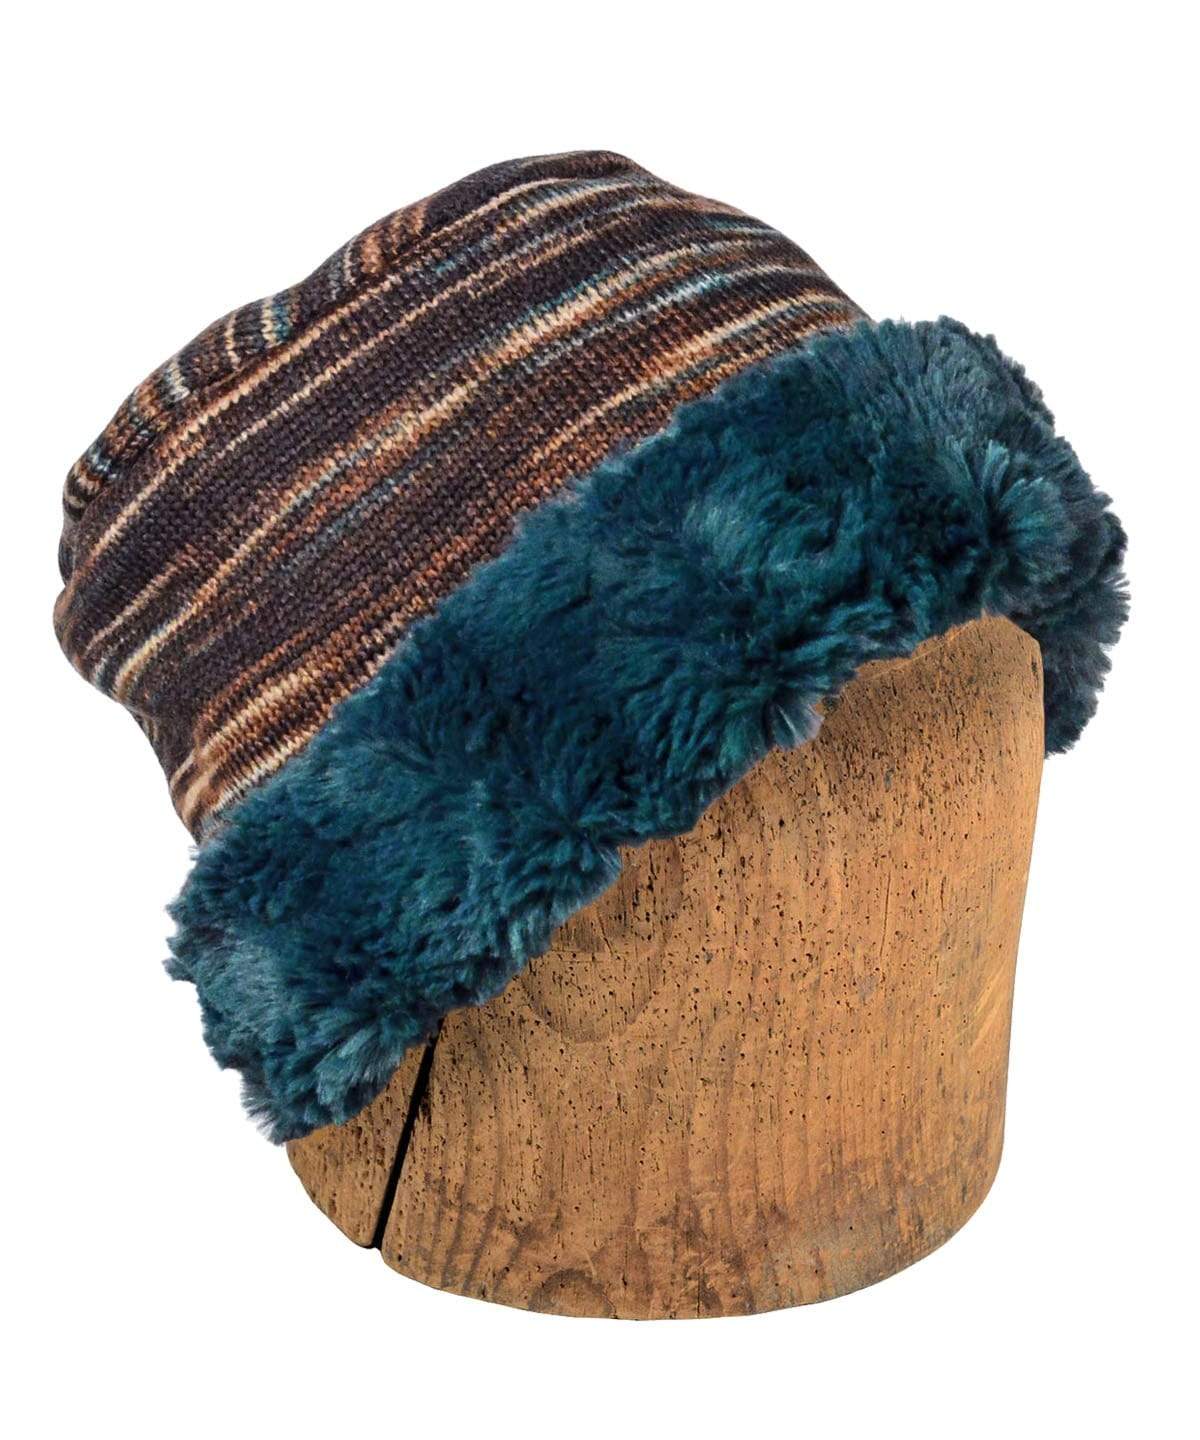 Men's Two-Tone Cuffed Pillbox | Sweet Stripes in English Toffee with Peacock Pond Teal Faux Fur | Handmade in Seattle WA by Pandemonium Millinery USA